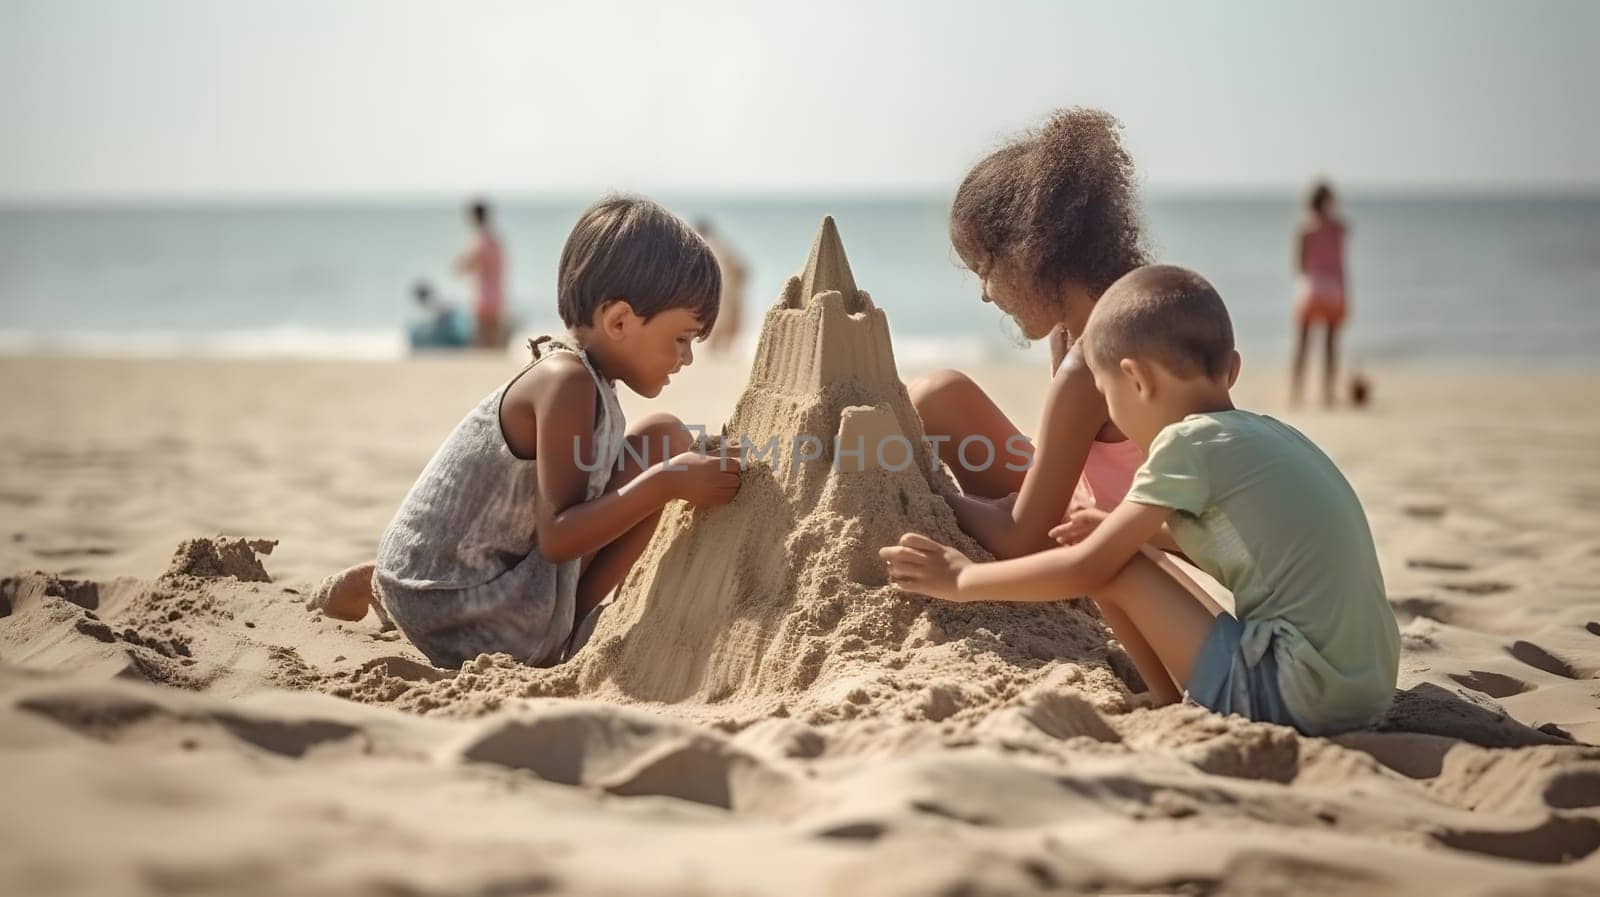 Children making sand castles on the beach. Neural network generated in May 2023. Not based on any actual person, scene or pattern.